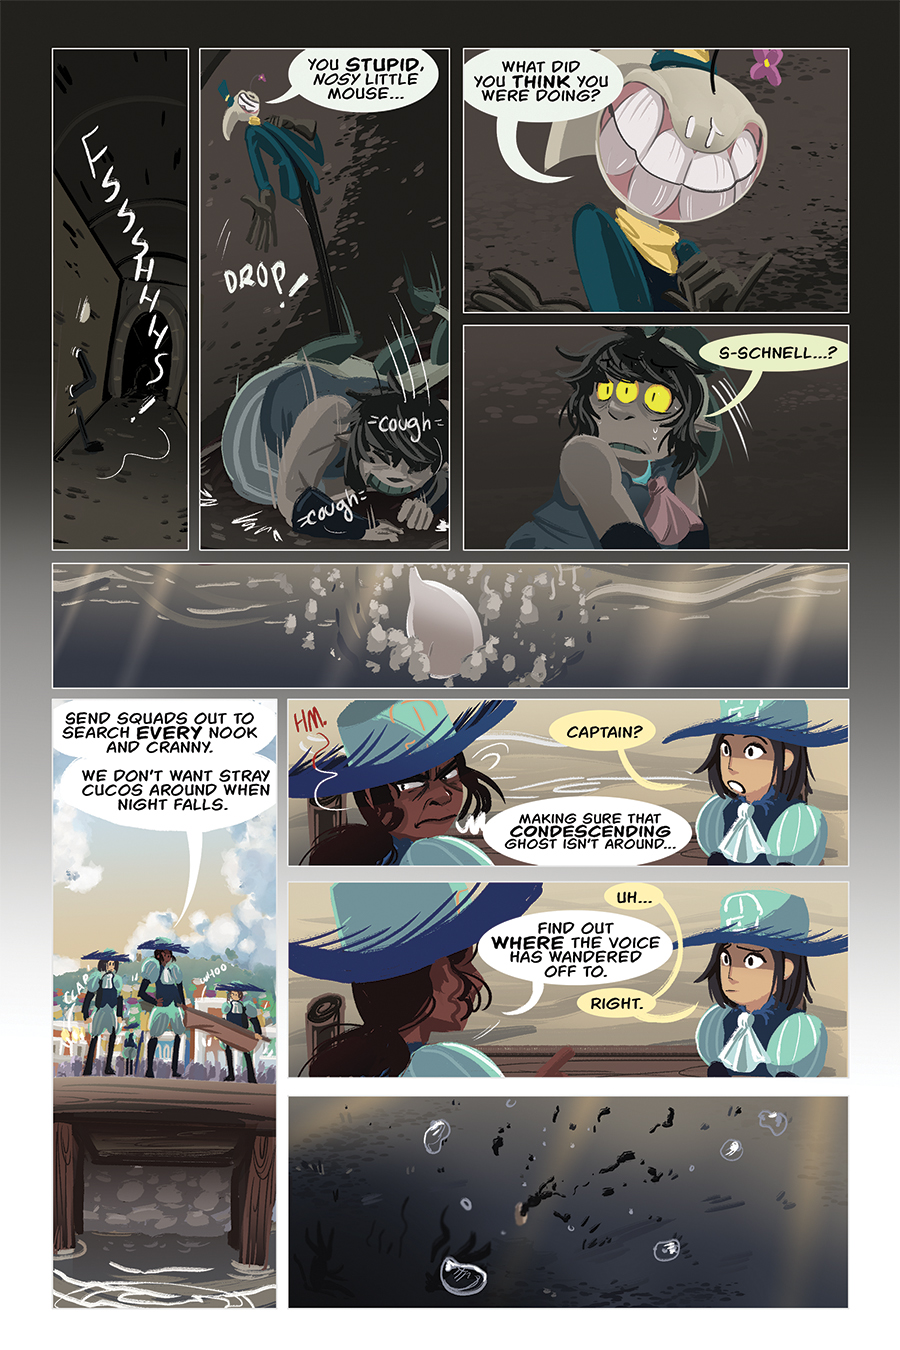 Chapter 8, page 25